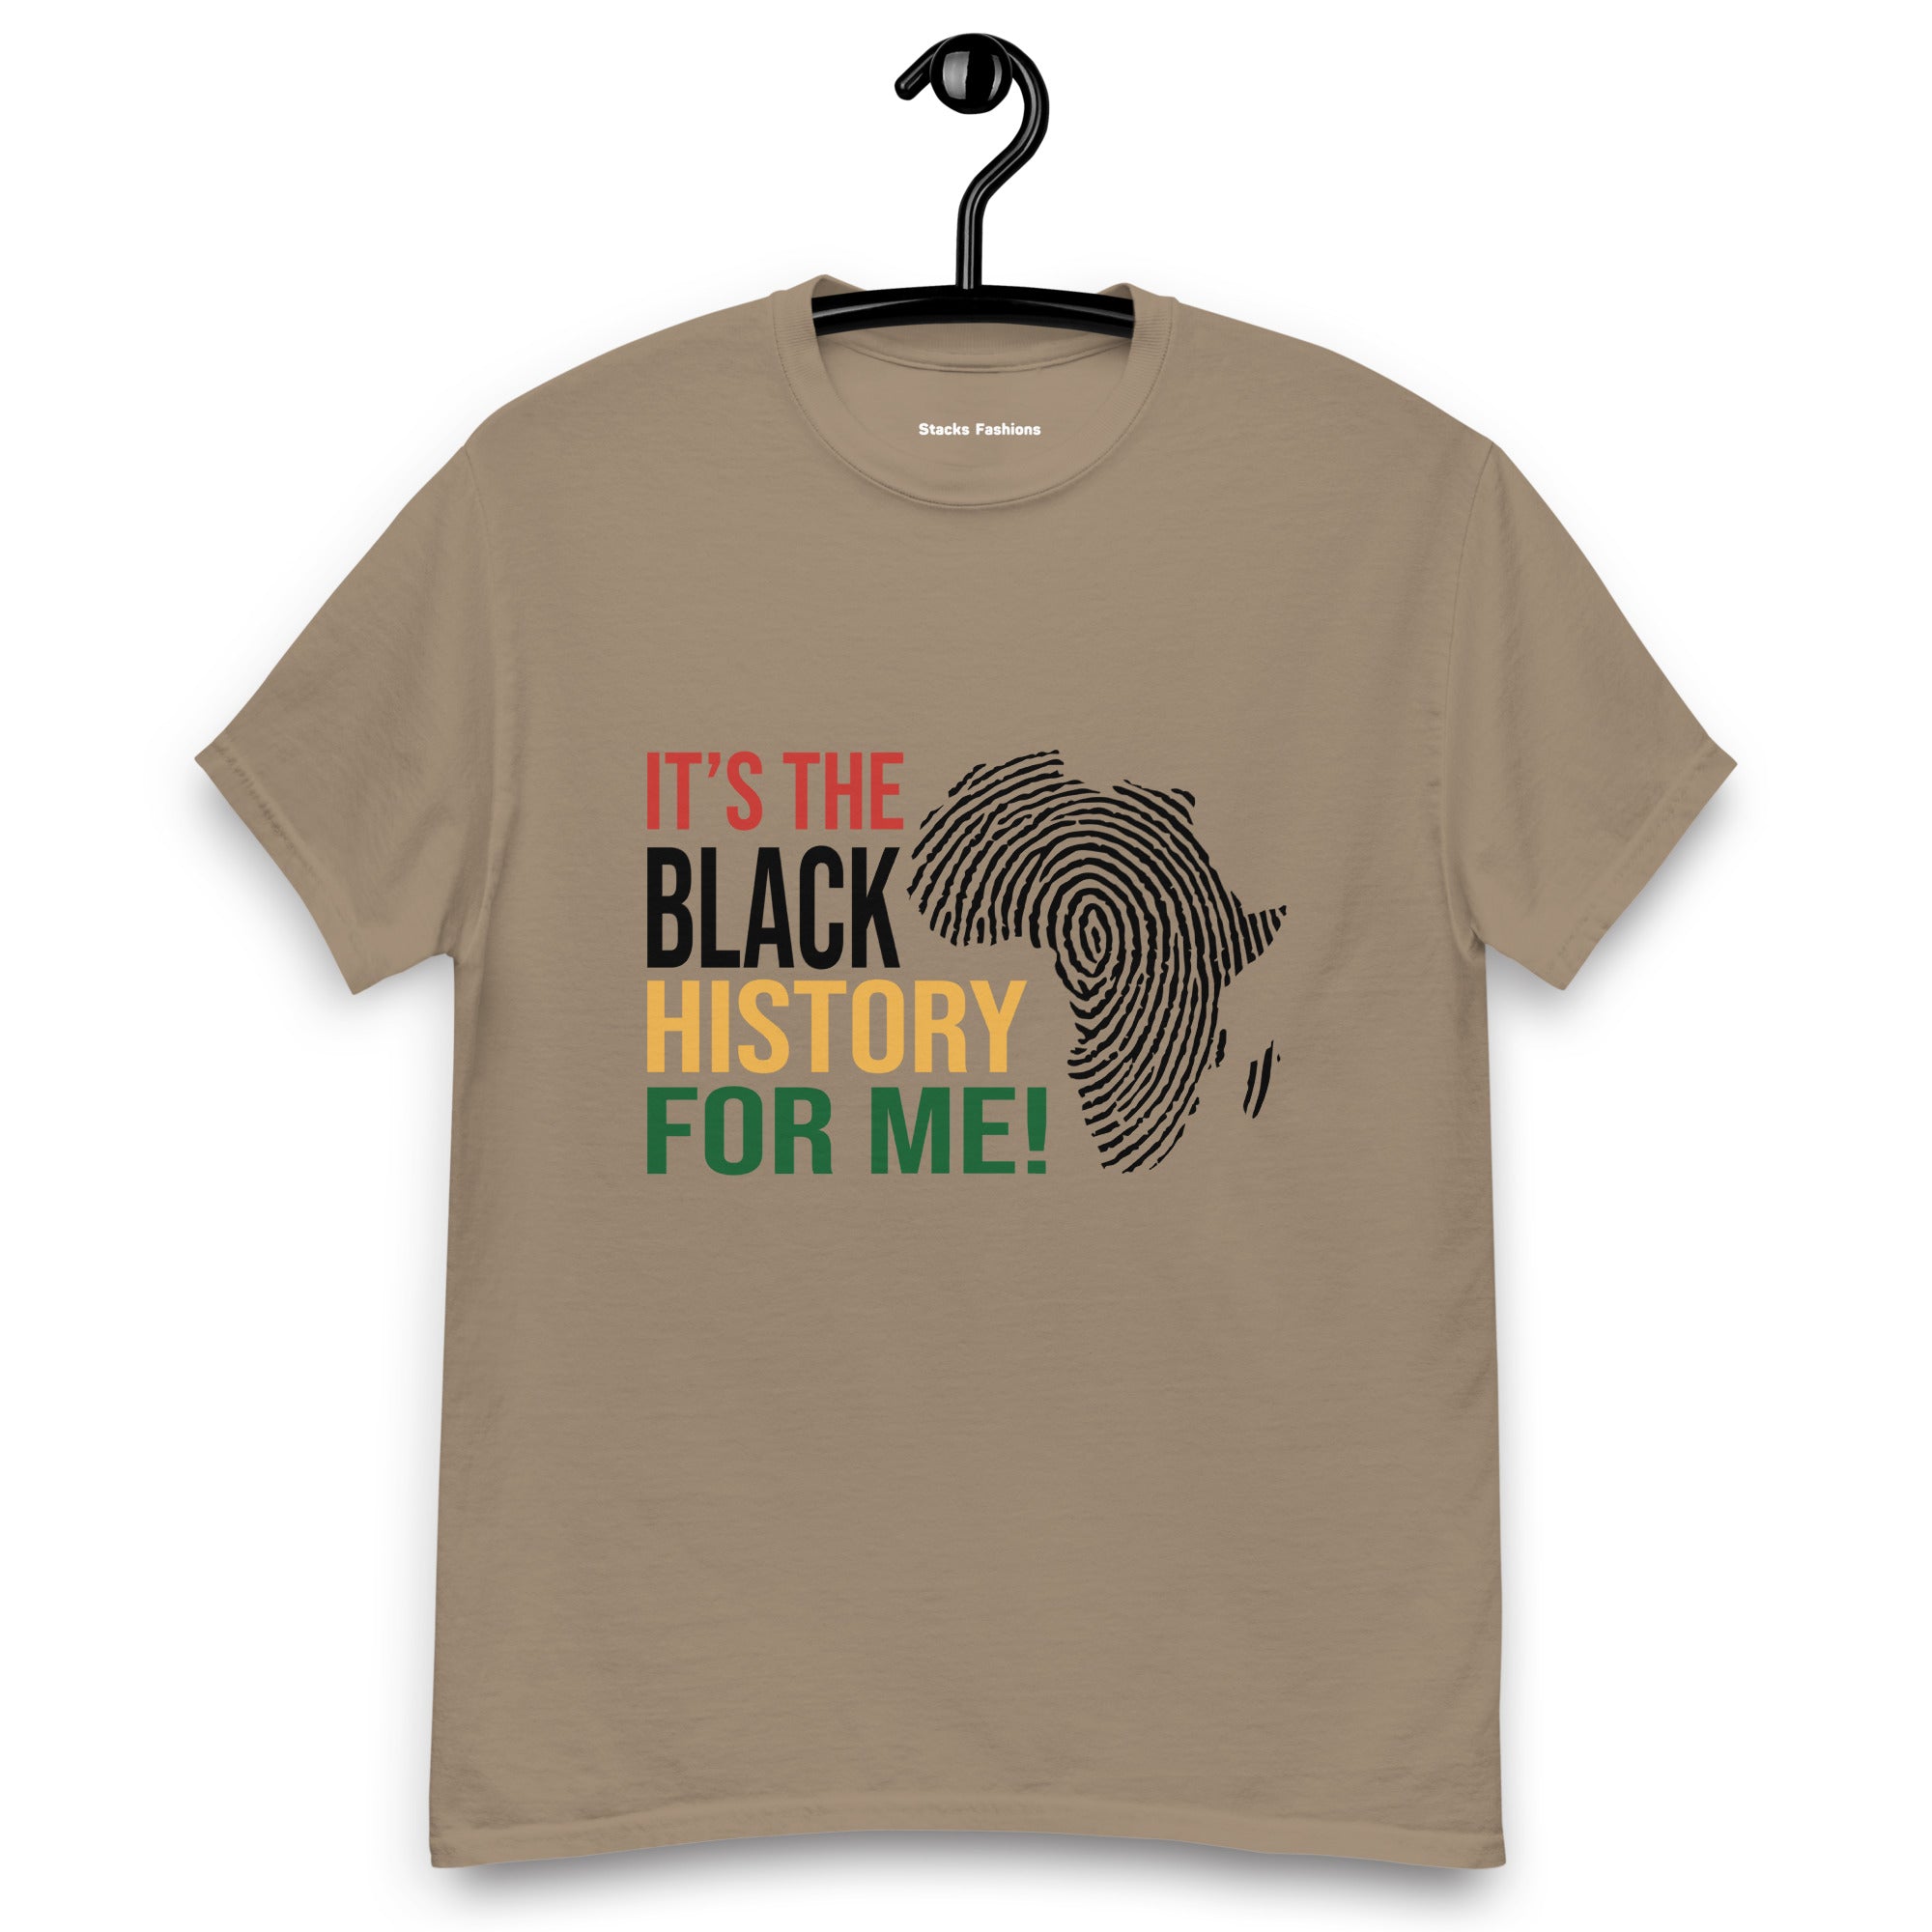 Black History For Me! Tee